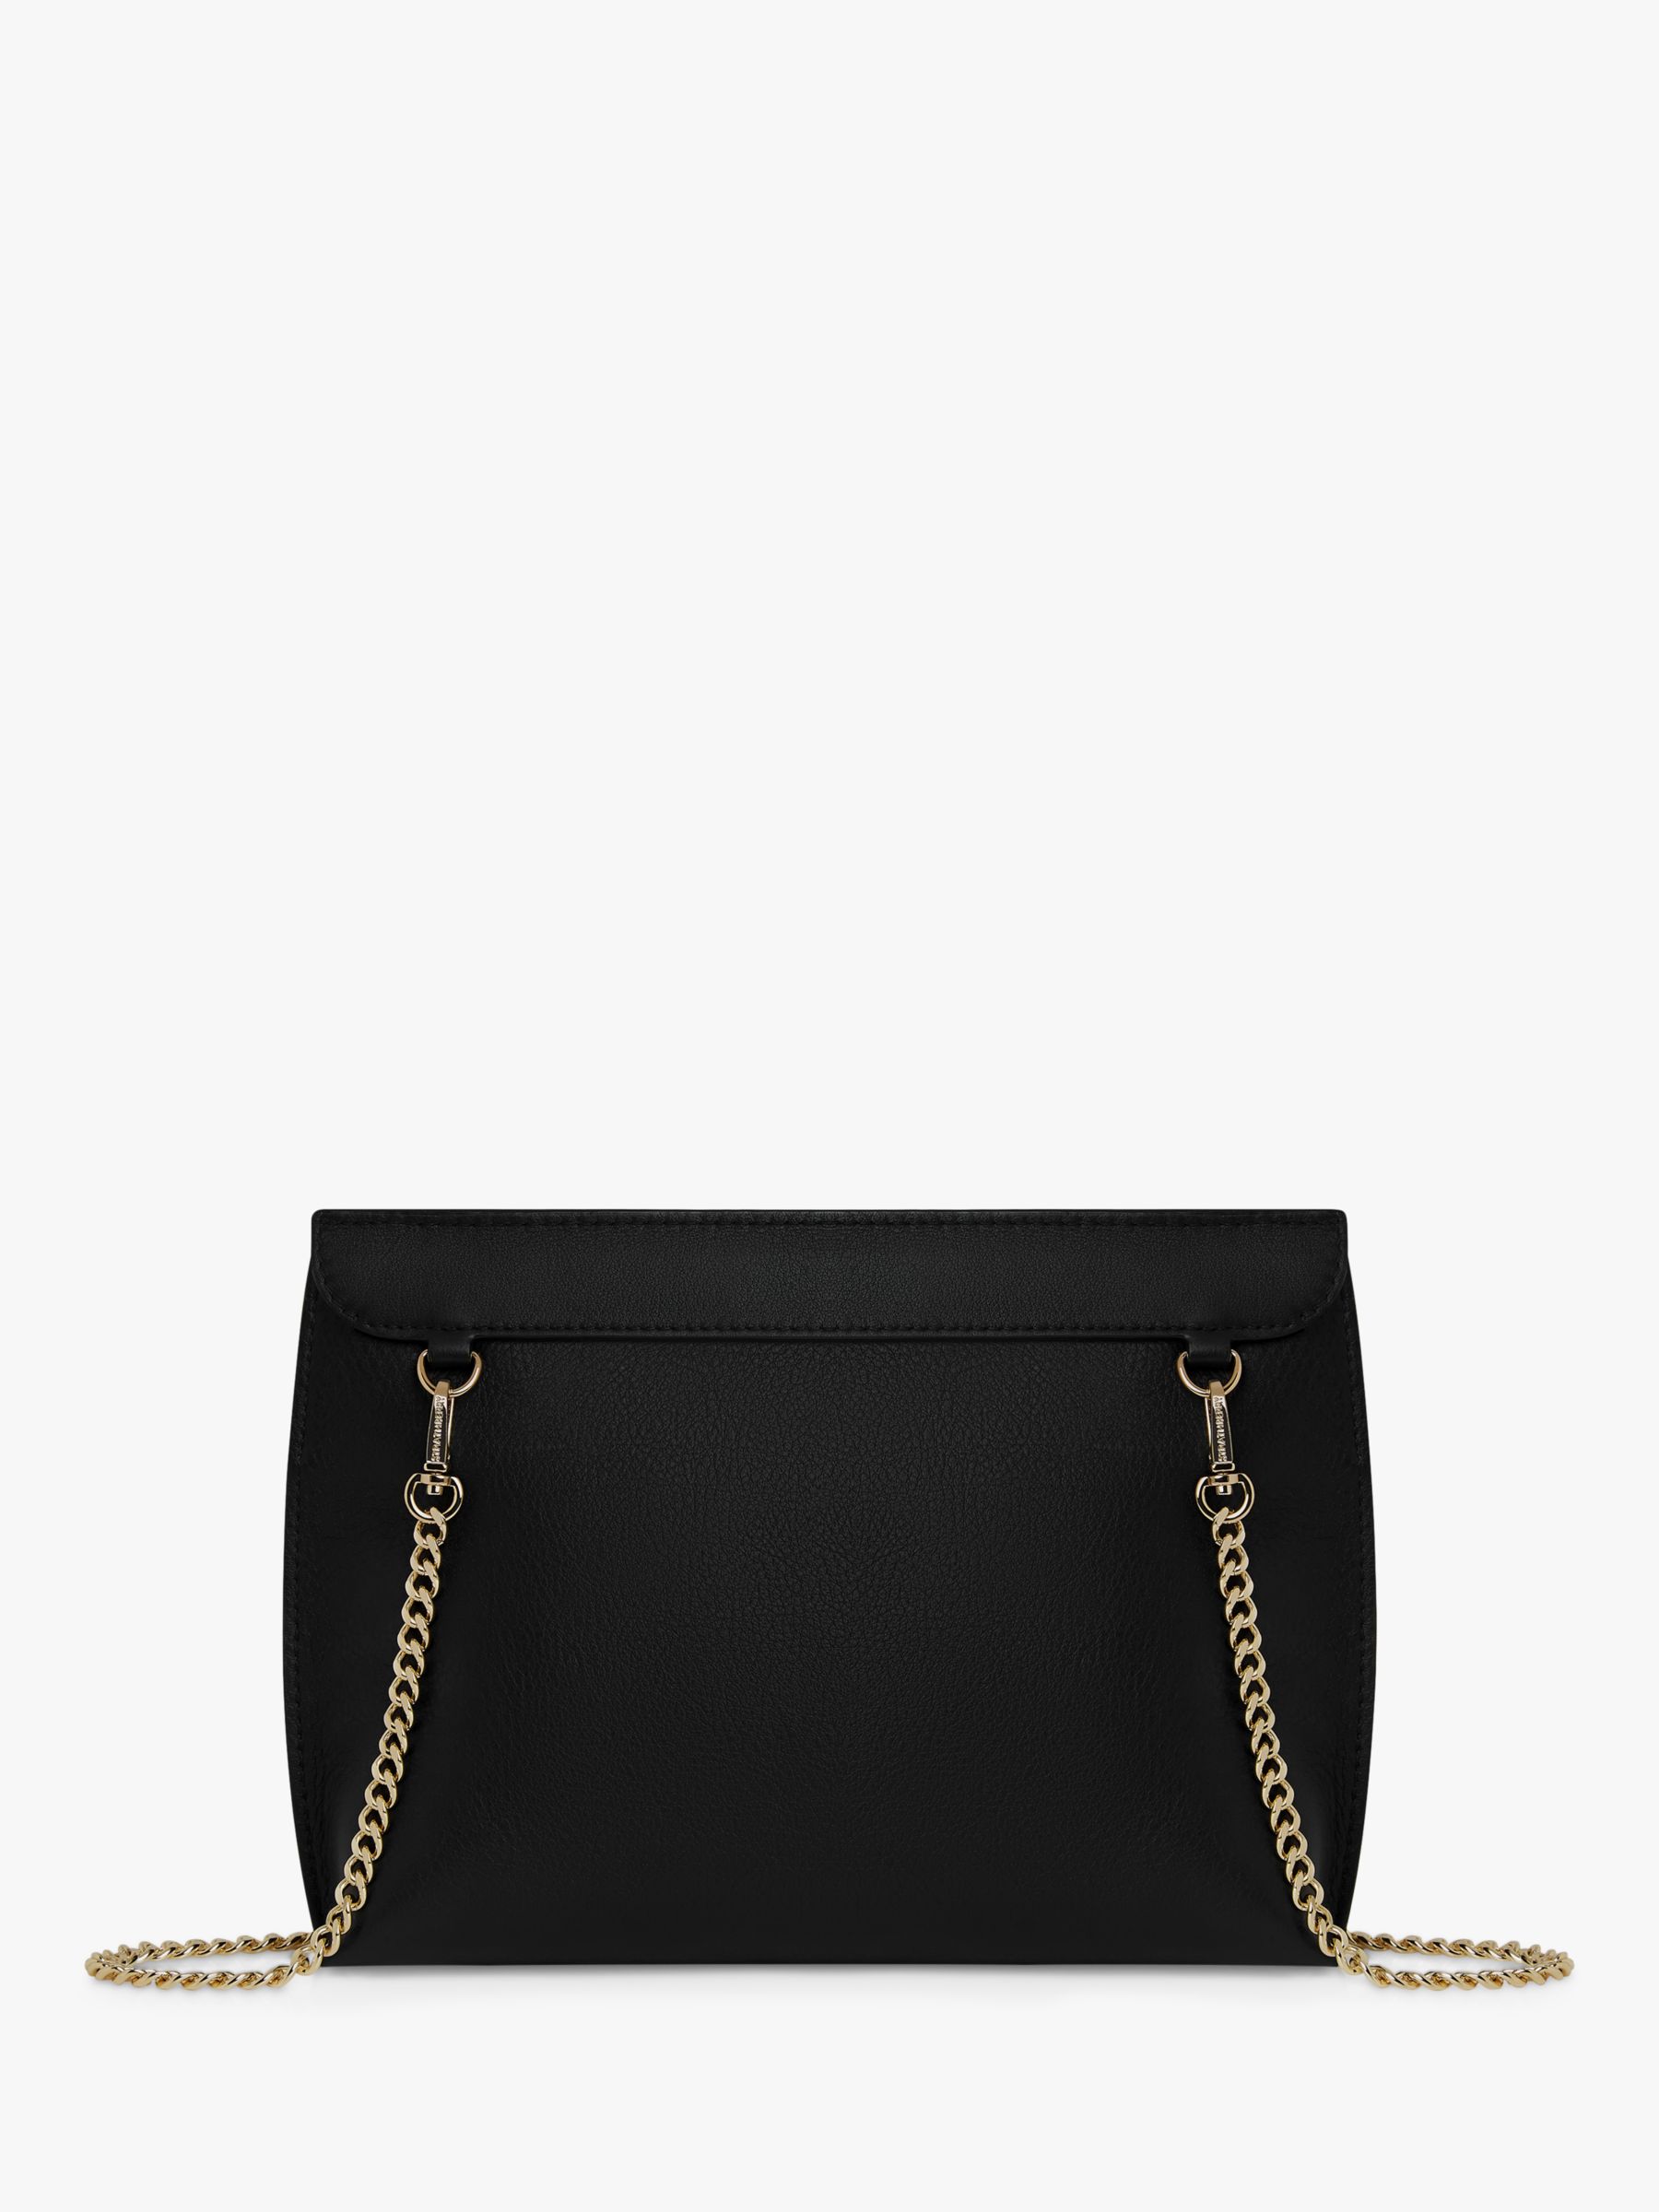 Buy Strathberry Stylist Leather Clutch Bag Online at johnlewis.com